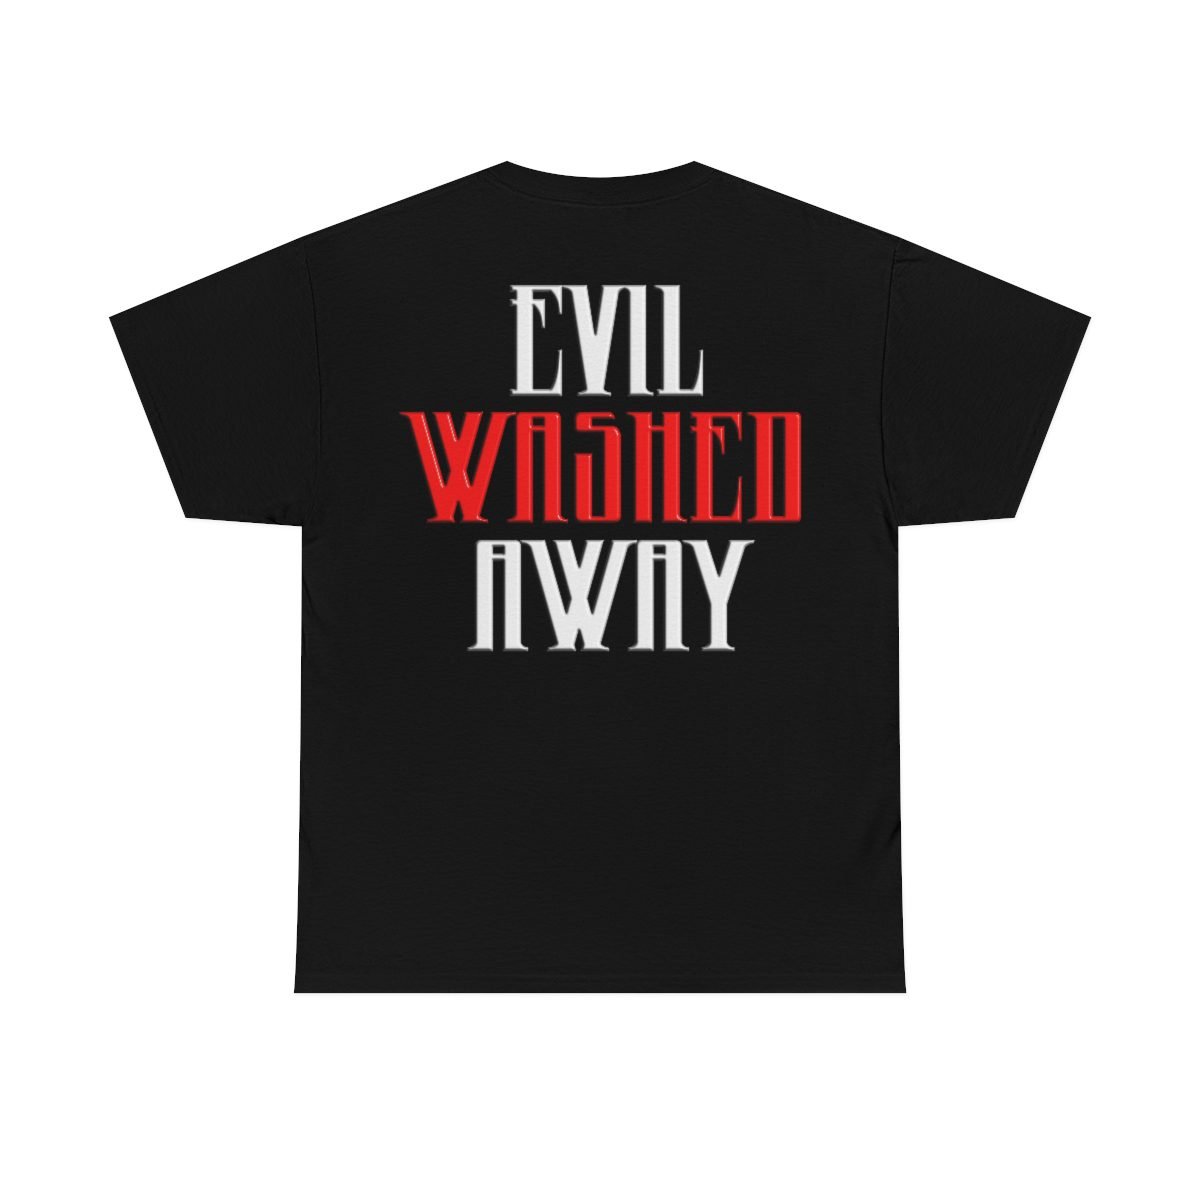 Brotality Evil Washed Away Short Sleeve Tshirt (5000D)